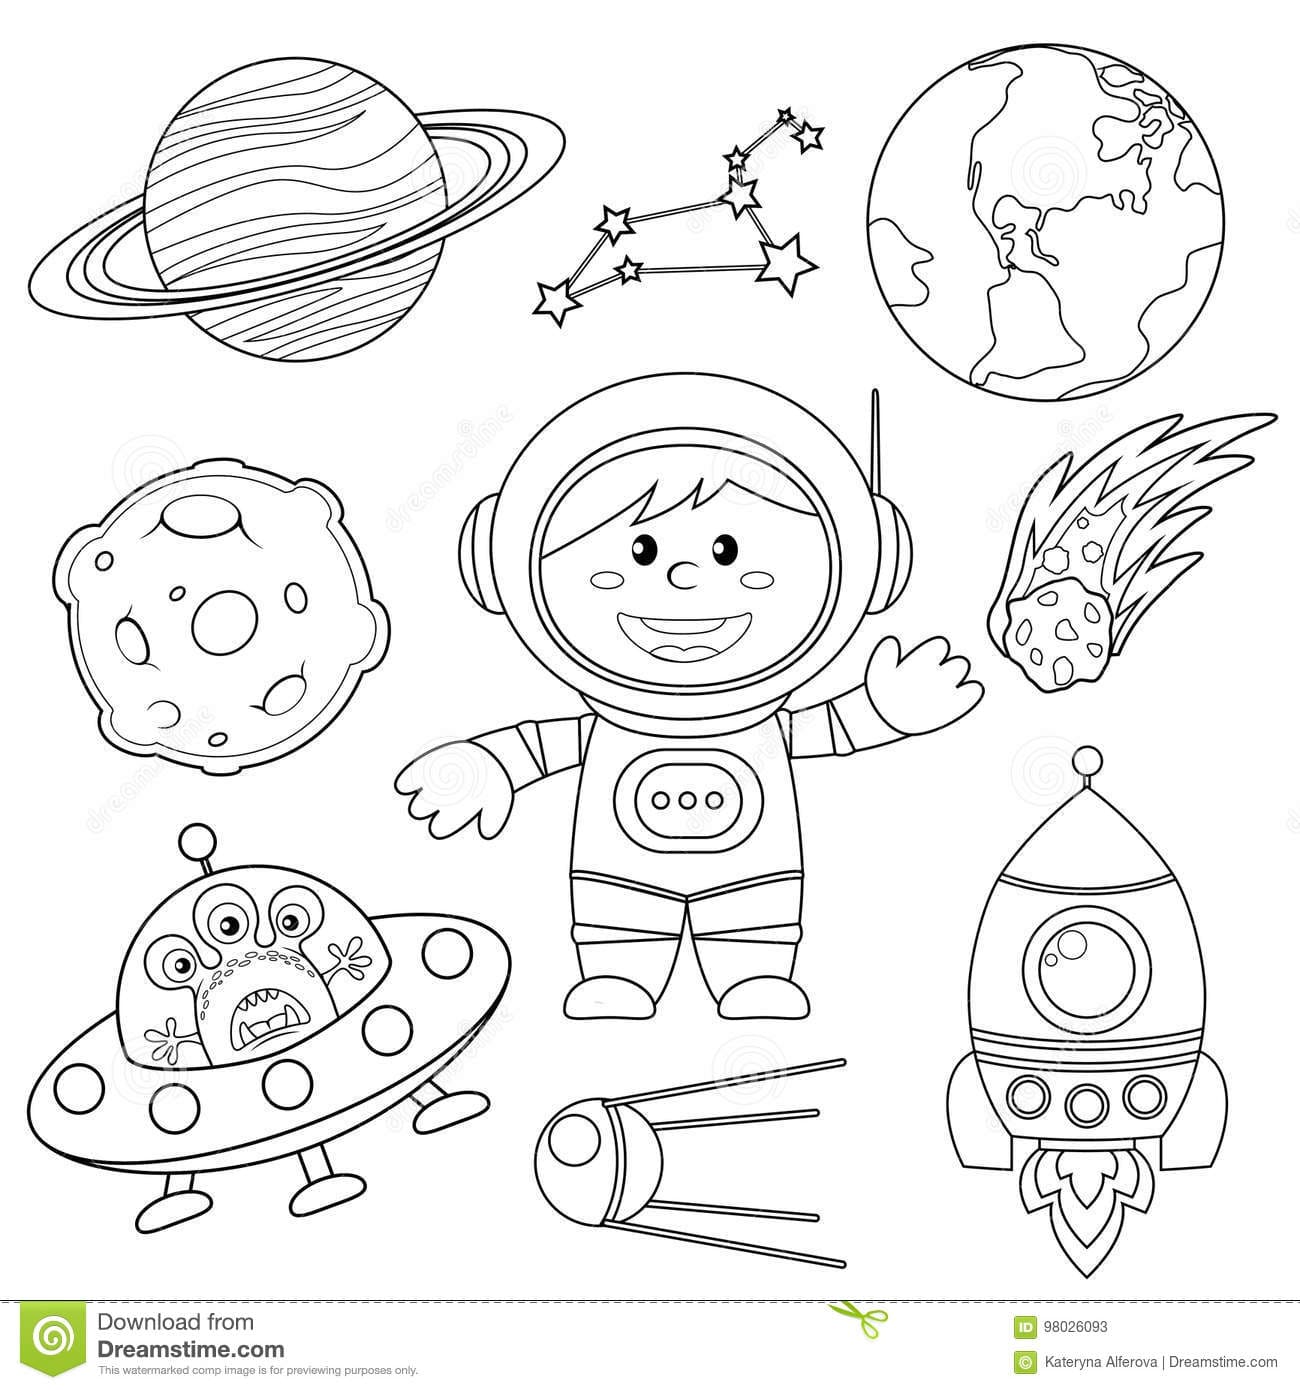 Astronaut, Earth, saturn, moon, UFO, rocket, comet, constellation, sputnik and stars Coloring Page